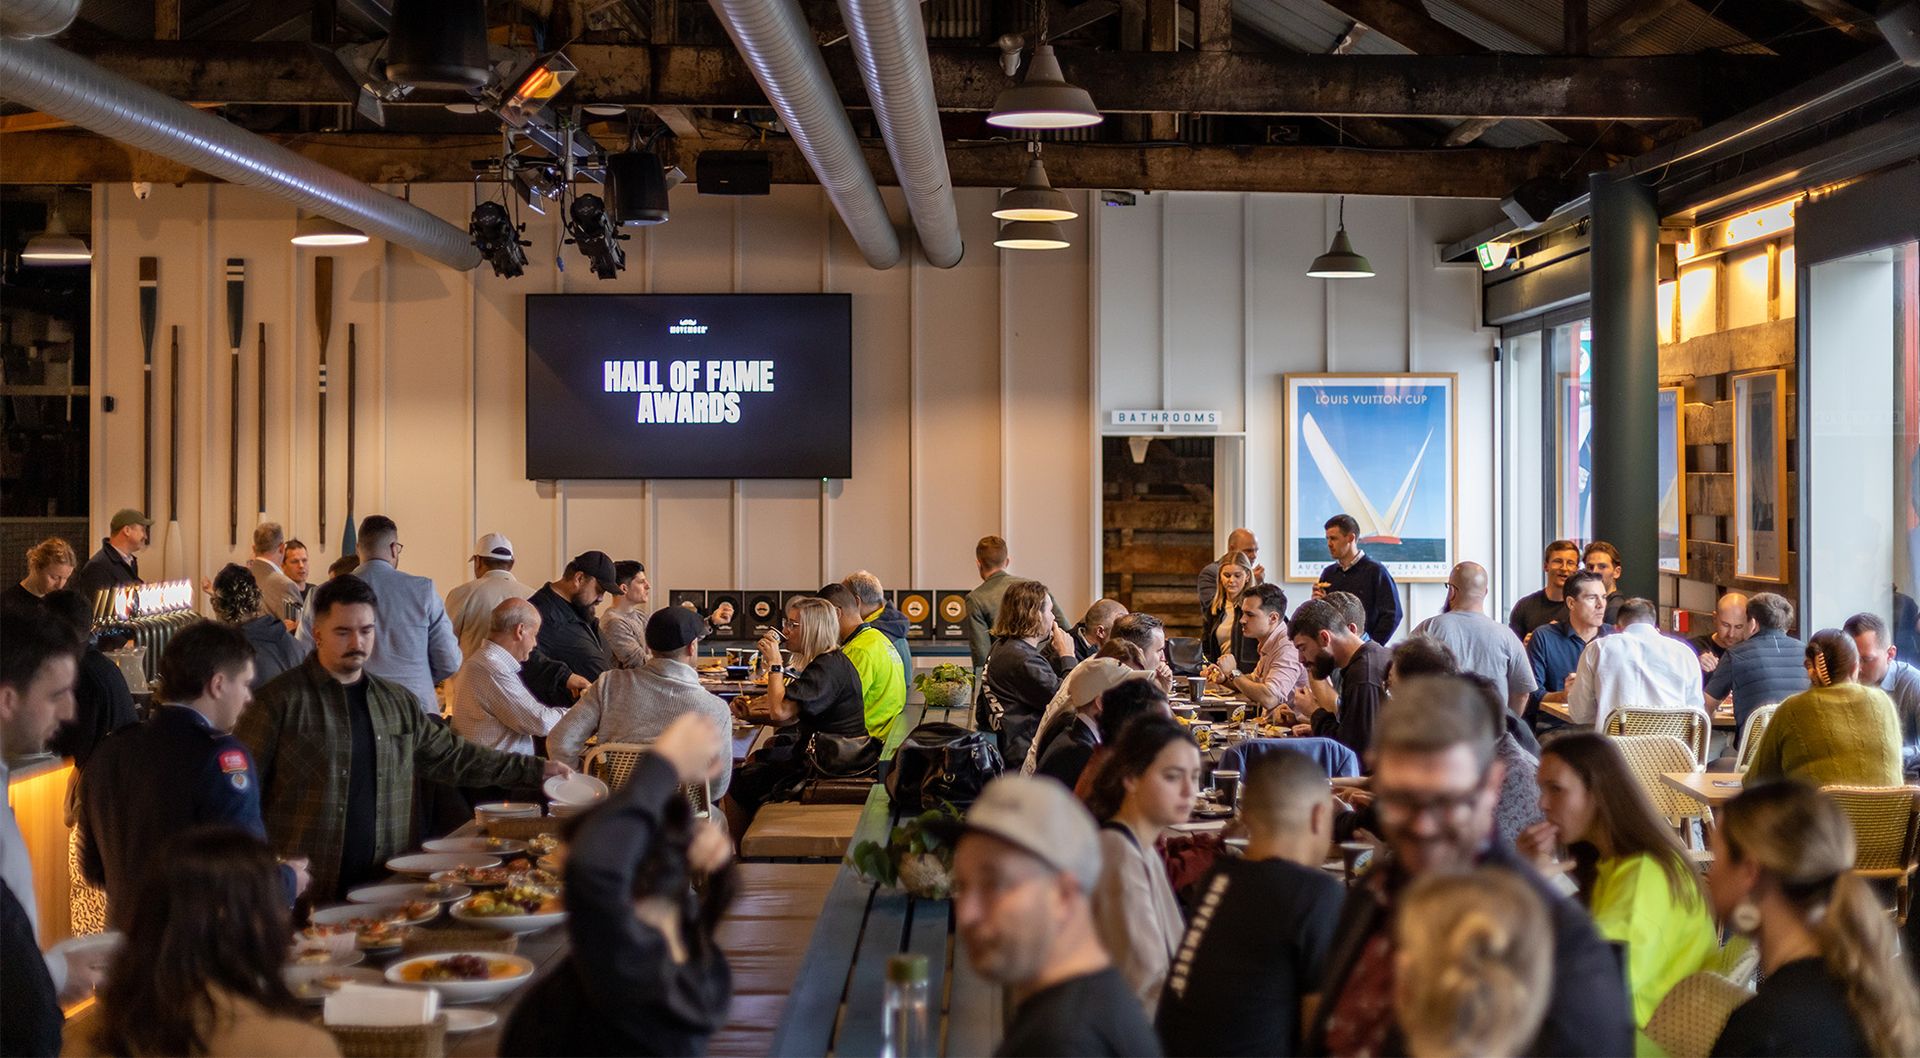 Auckland Hall of Fame Awards 2021 event space